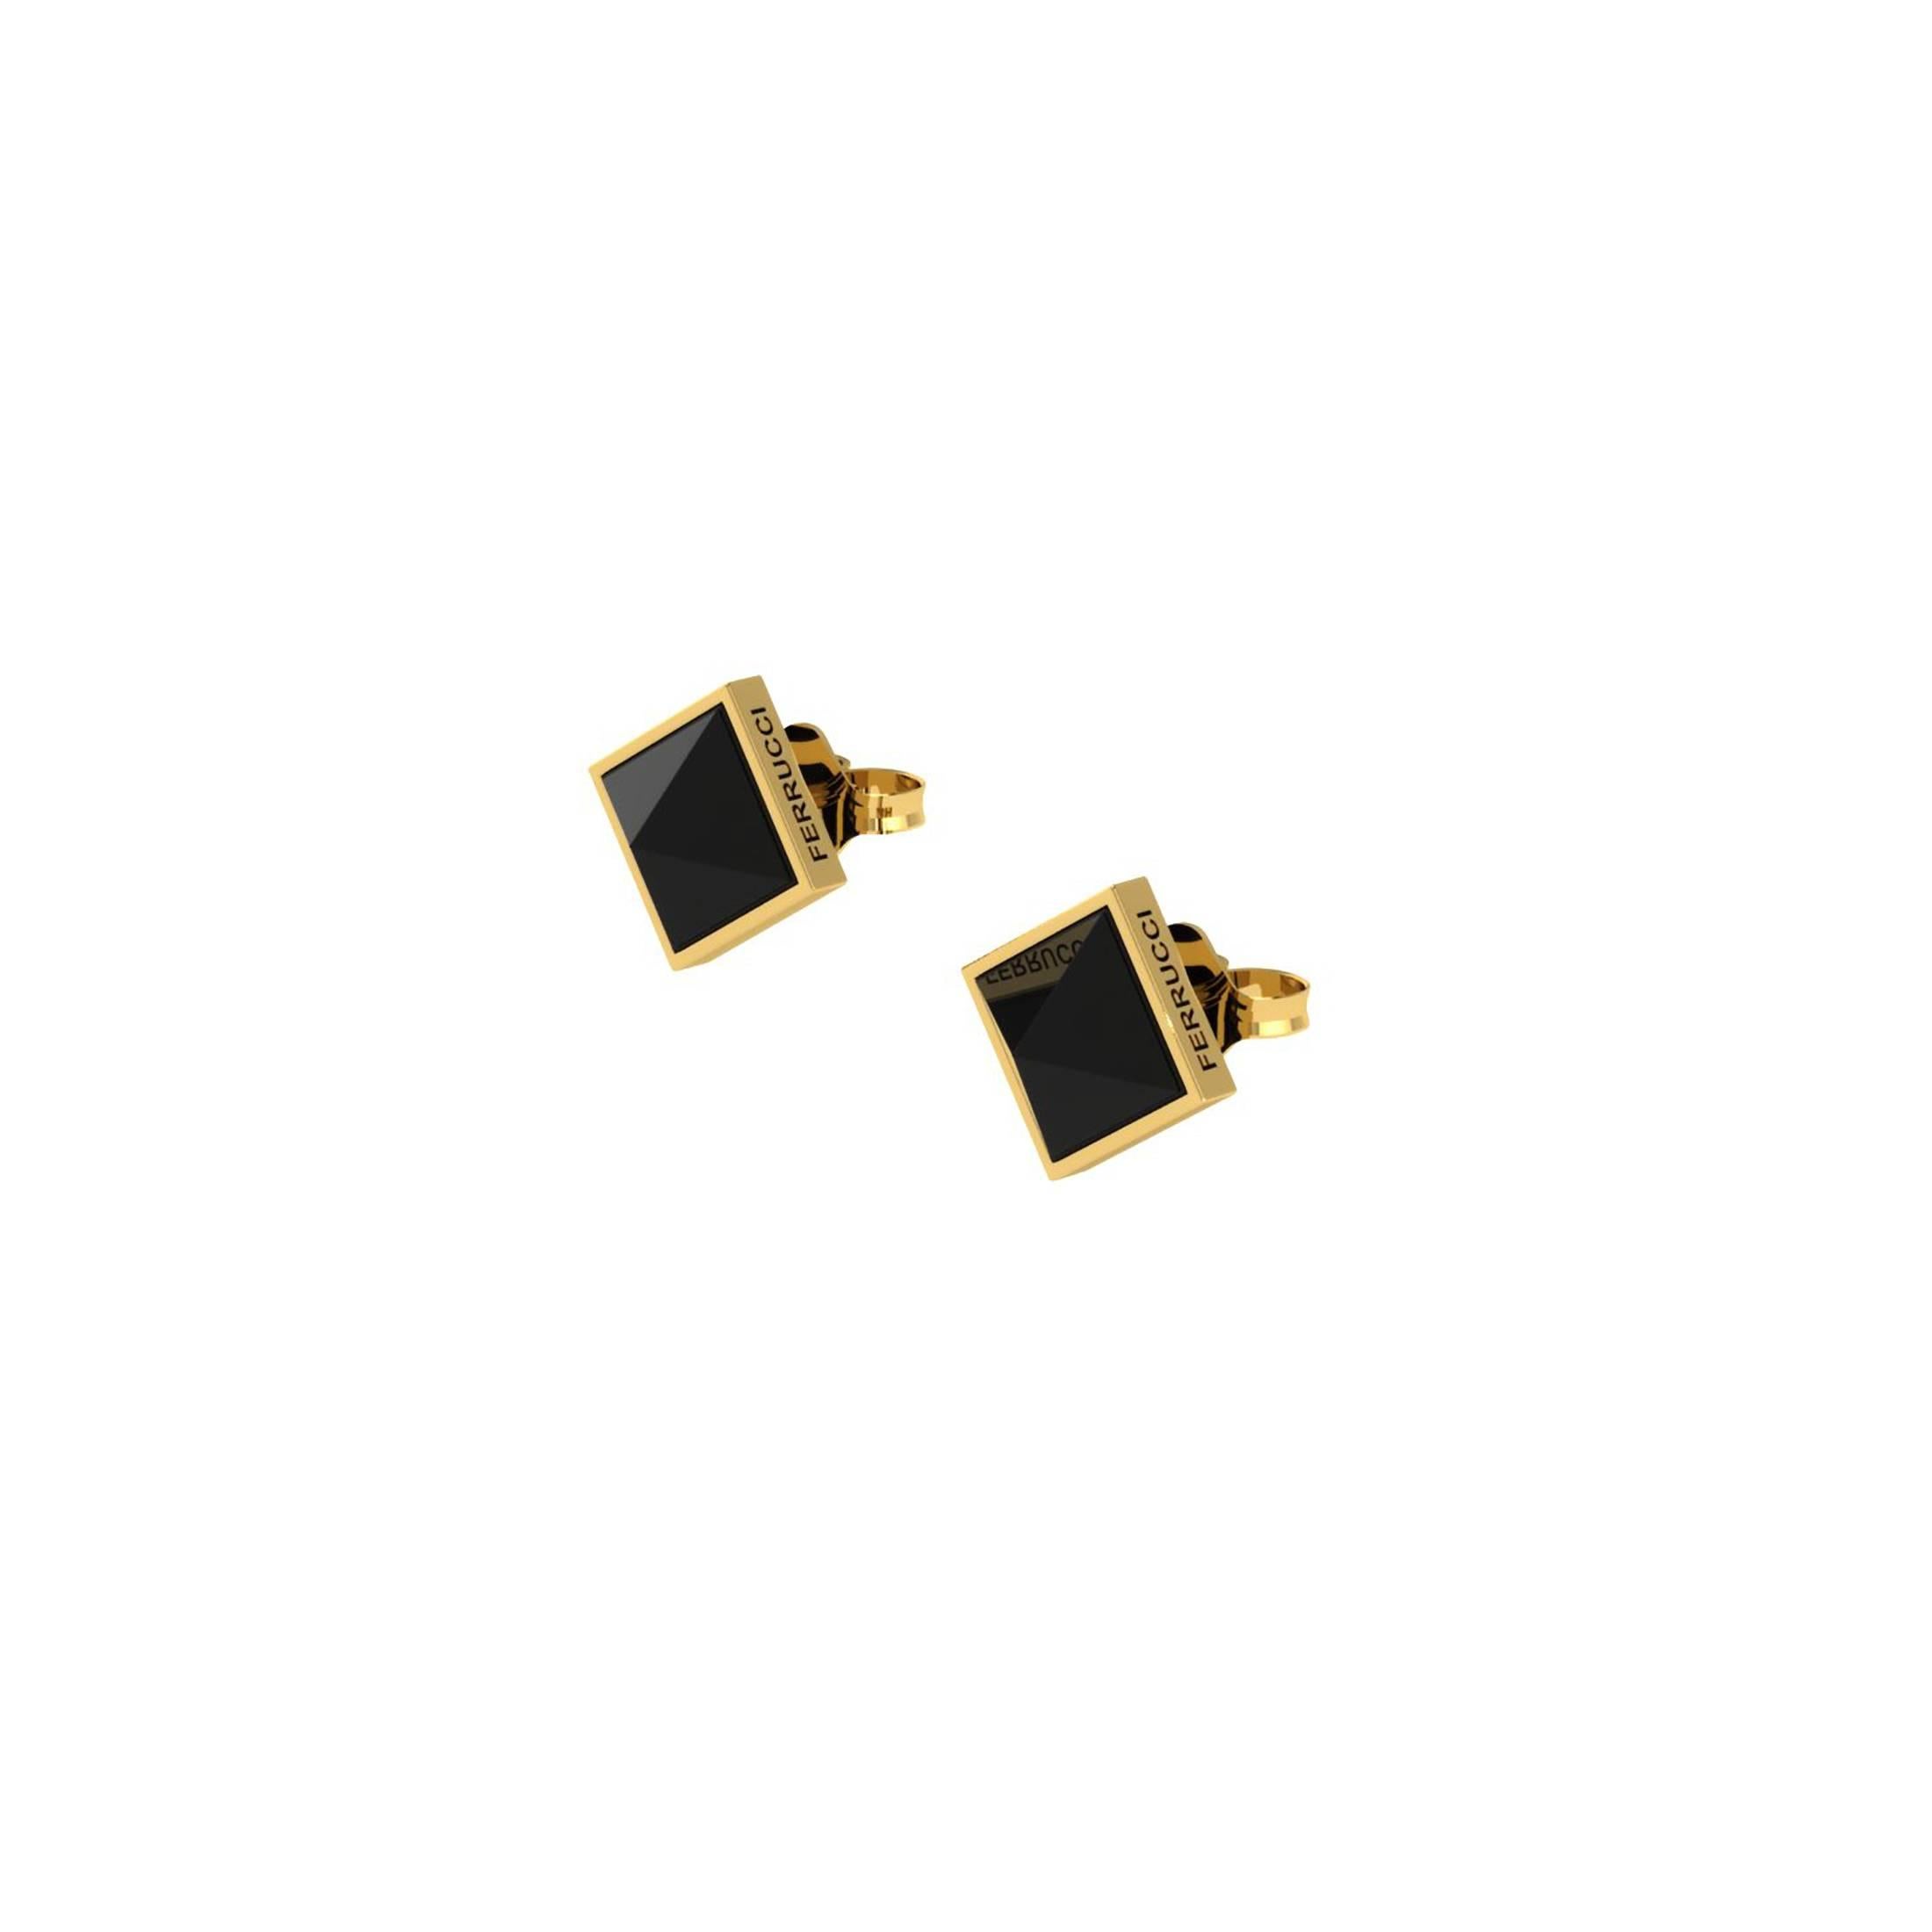 From FERRUCCI Pyramids collection, these black onyx cut, set in 18k yellow gold stud earrings, hand made in New York city by Italian master jeweler Francesco Ferrucci, an Art Deco inspire design, elegant but light for every occasion, easy to wear